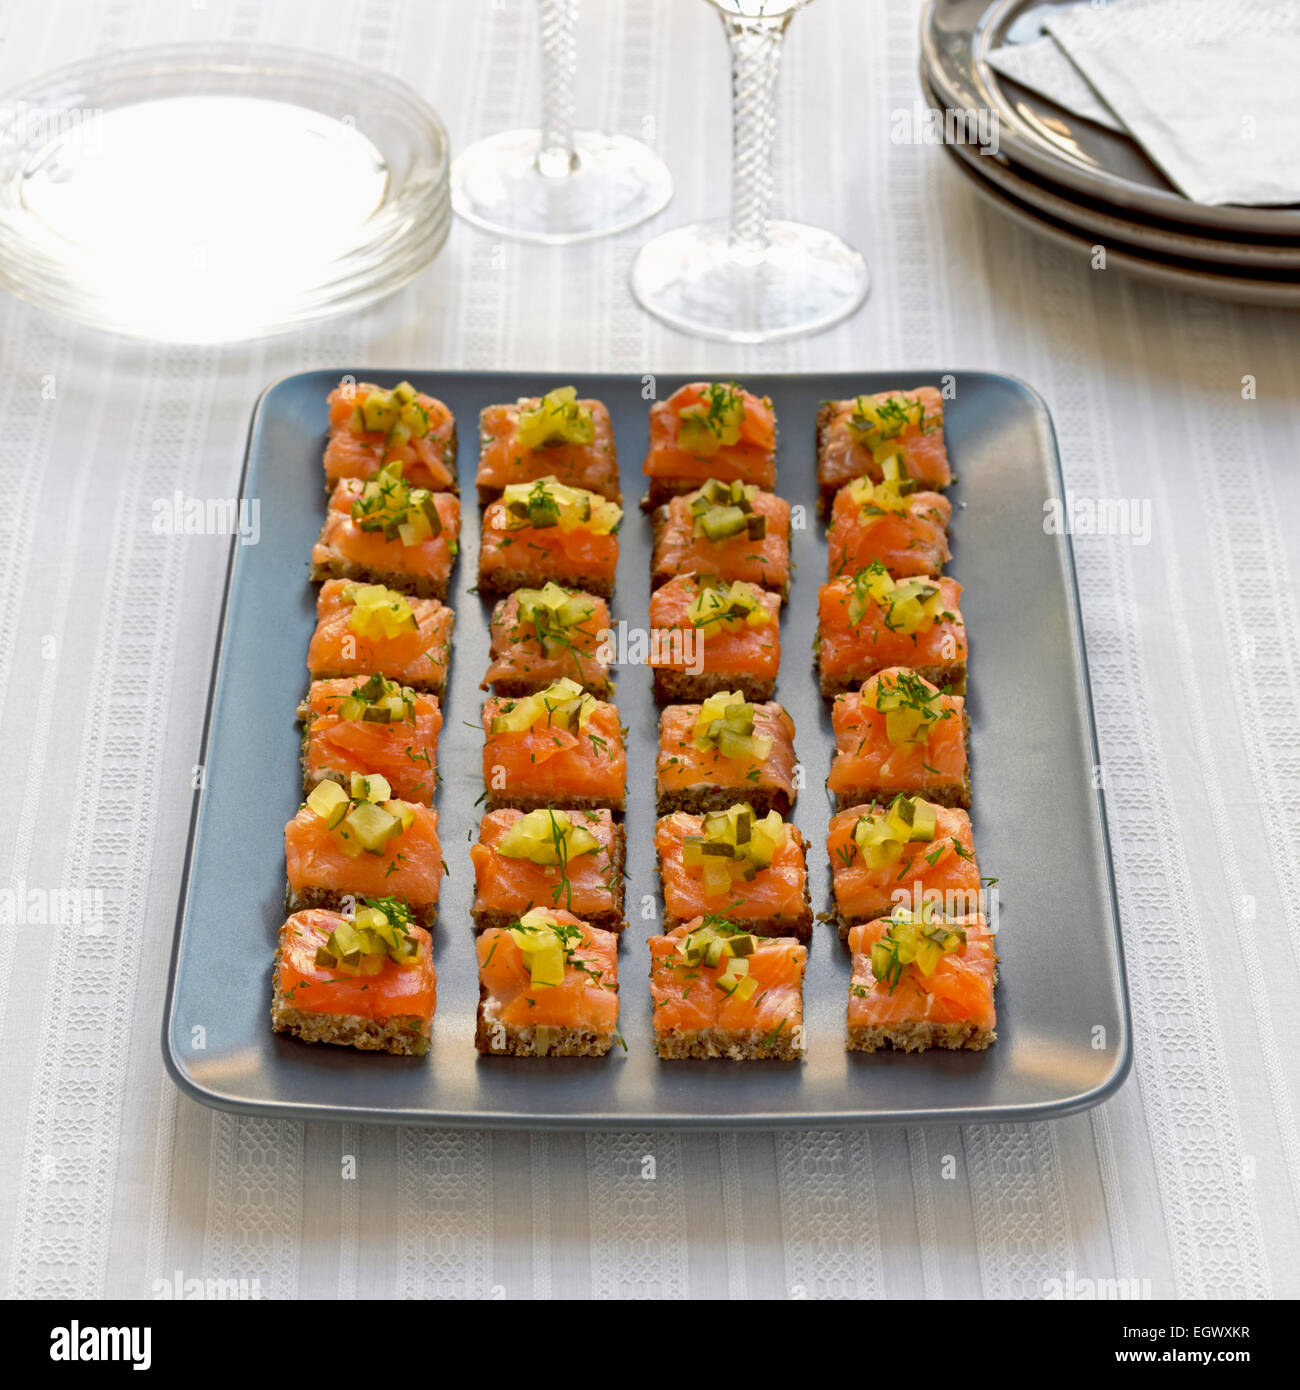 Salmon on rye canapes Stock Photo